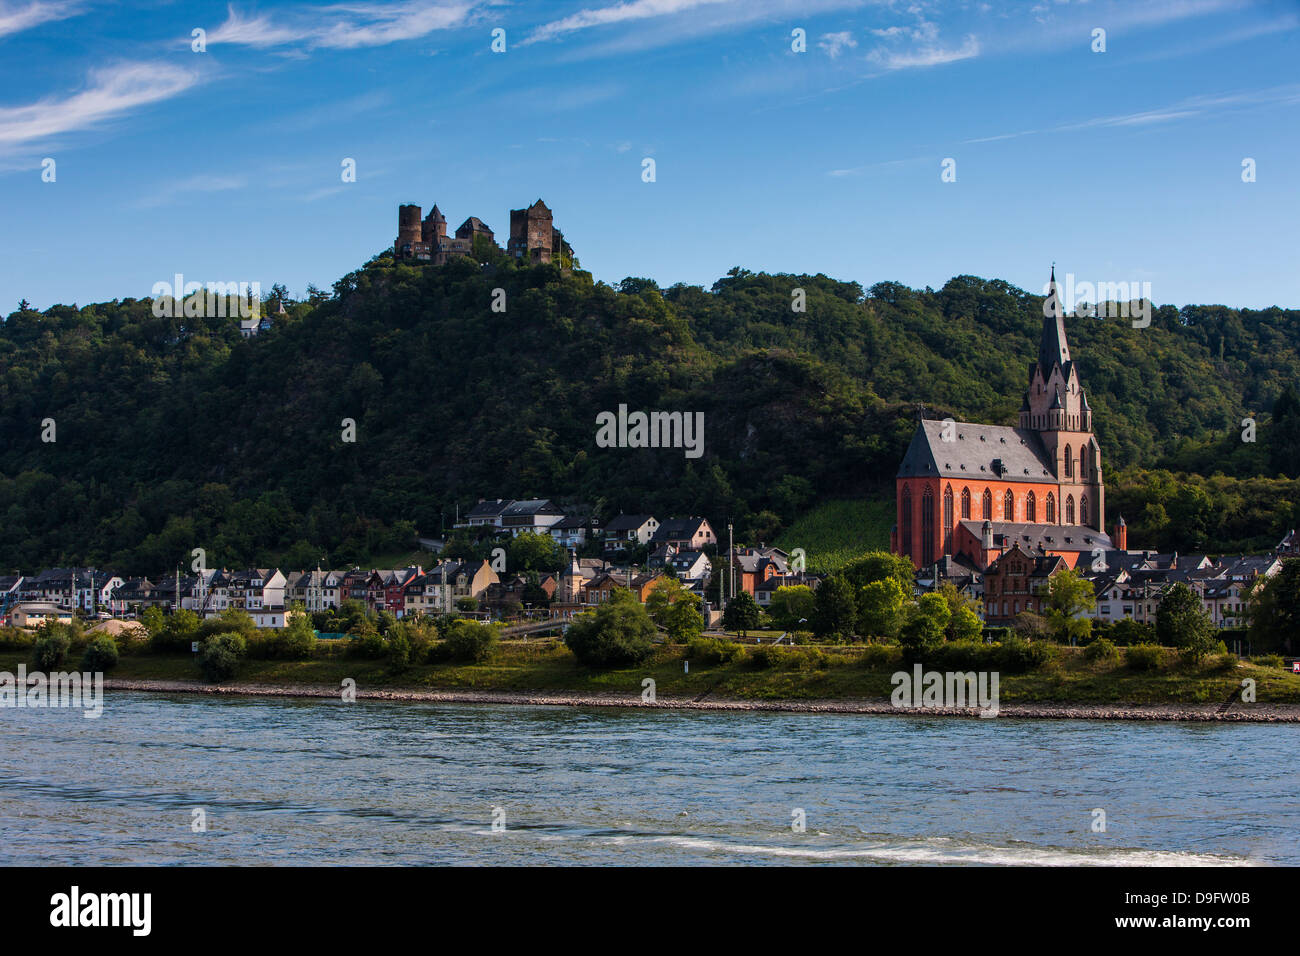 Castle Stahleck above the village of Bacharach in the Rhine valley, Rhineland-Palatinate, Germany Stock Photo